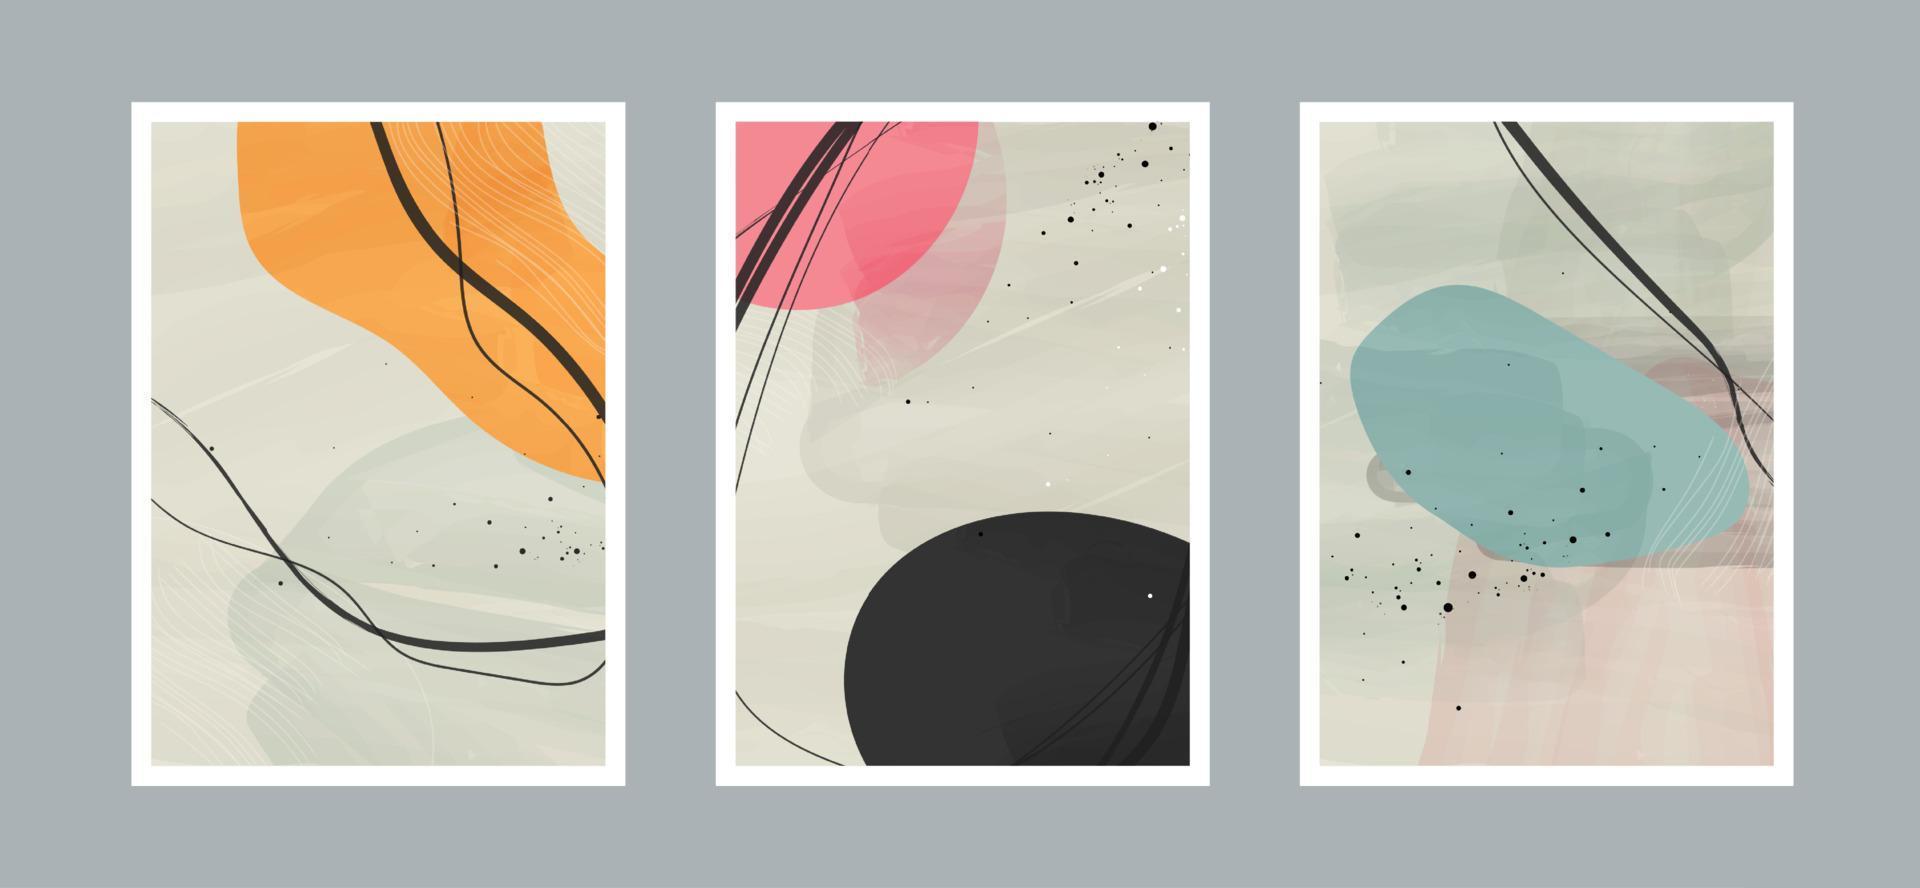 Abstract arts background with different shapes for wall decoration, postcard or brochure cover design. Vector illustrations design.